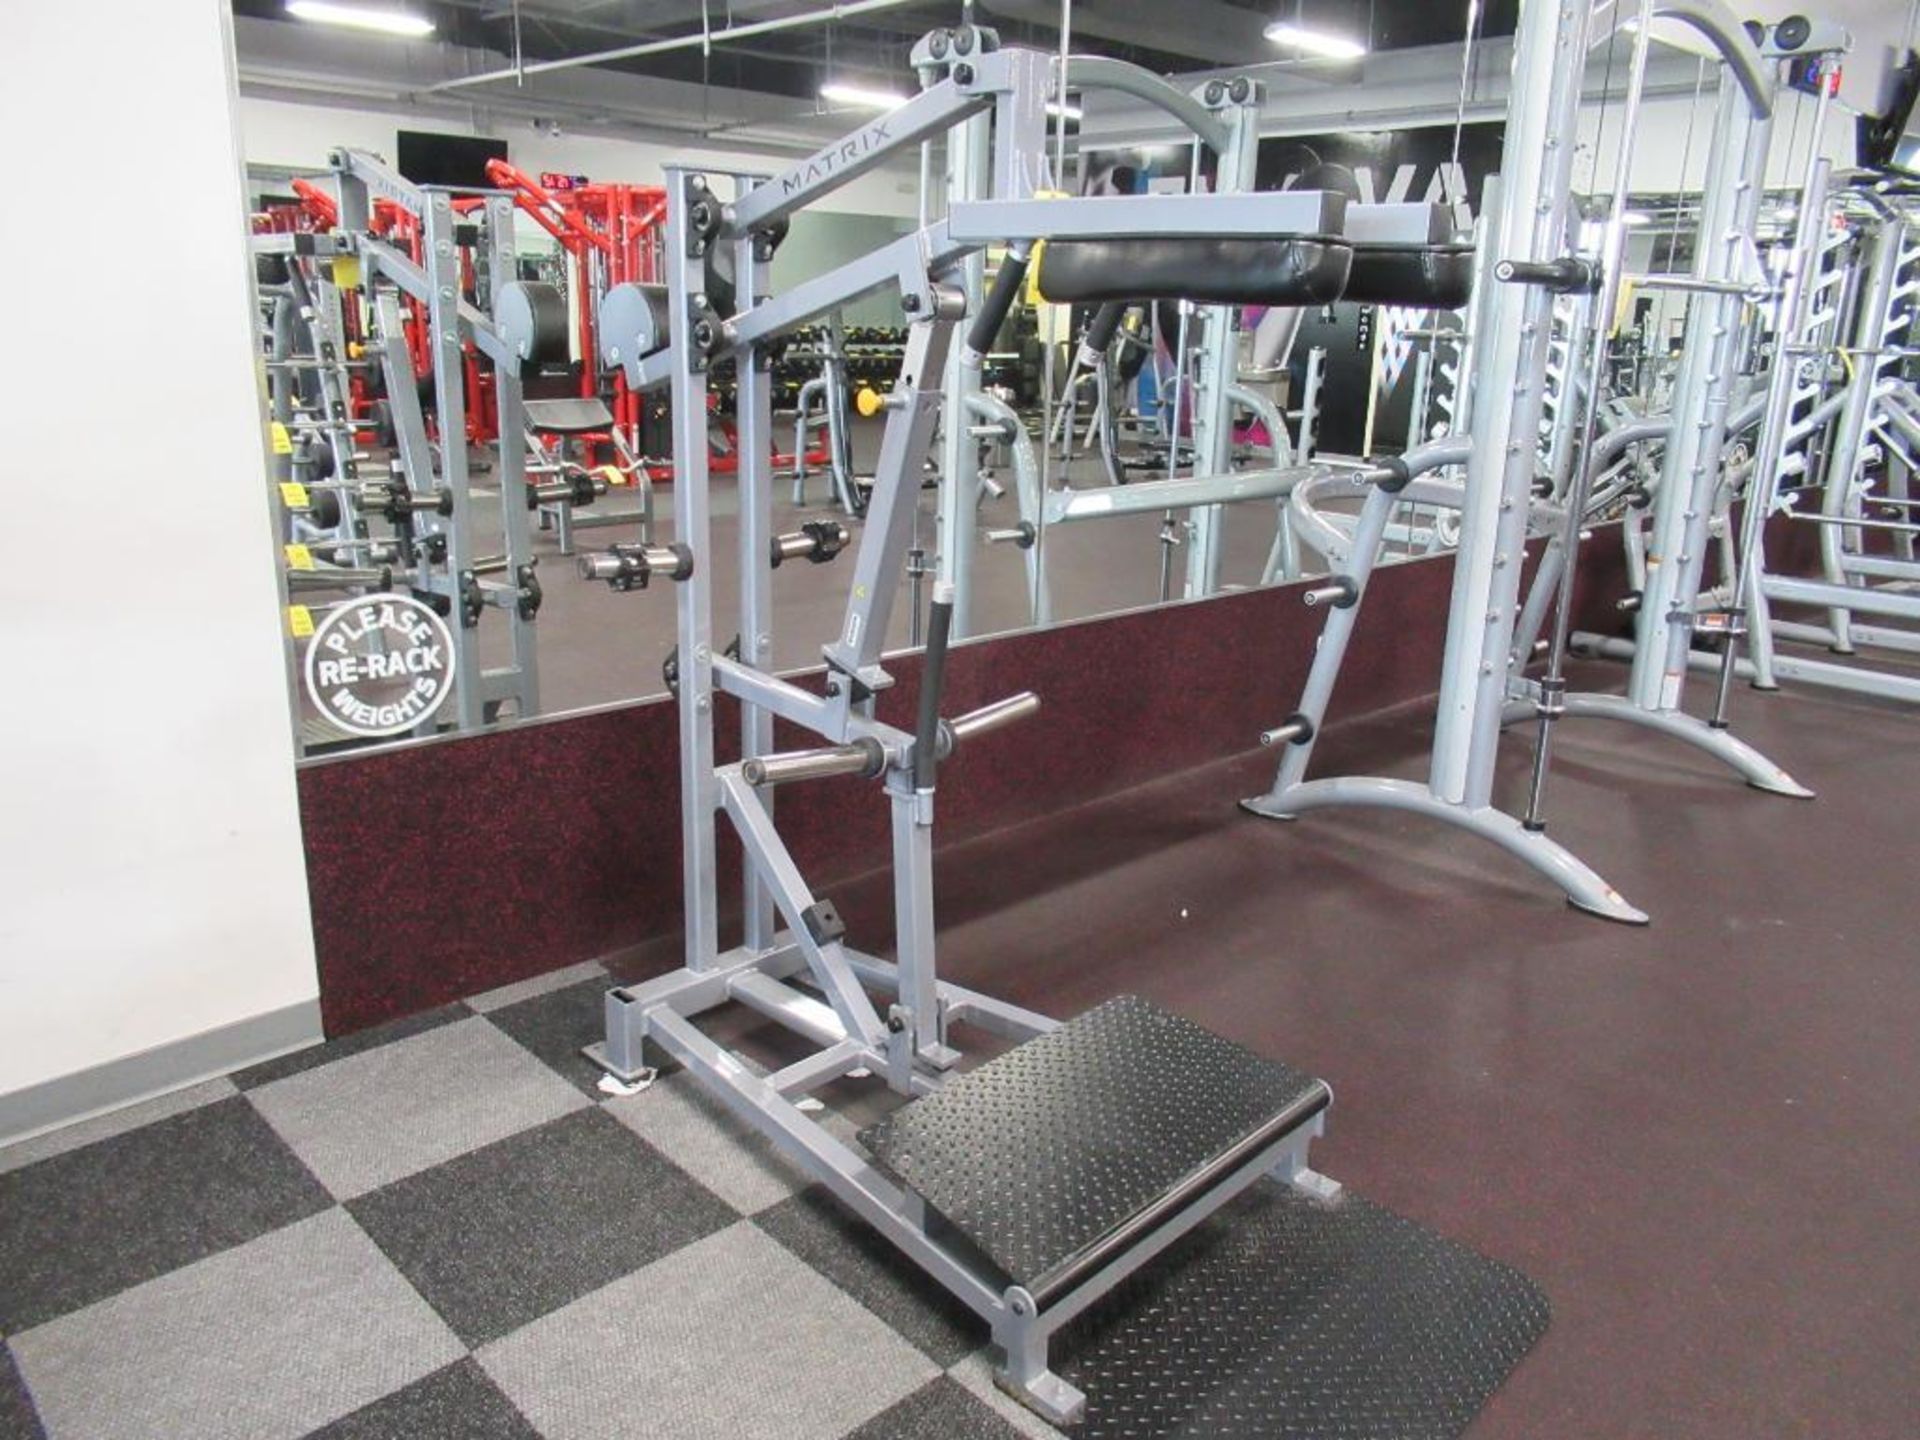 Matrix Model VY-400-02 Plate Loaded Squat Machine Max Weight 350 lbs. - Image 2 of 3